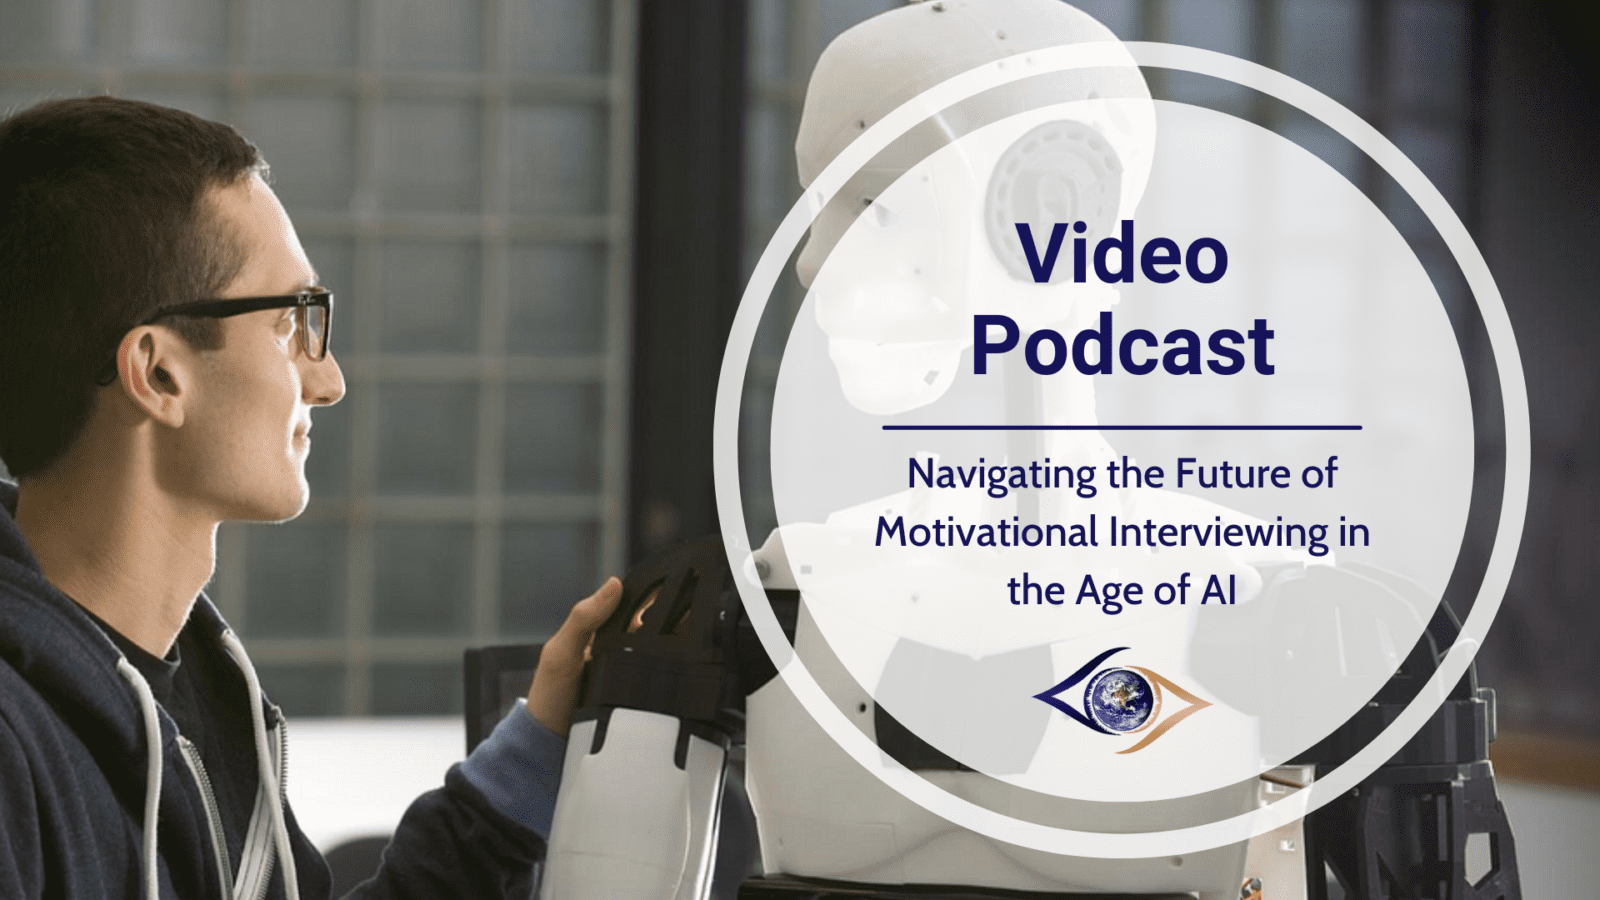 Navigating the Future of Motivational Interviewing in the Age of AI